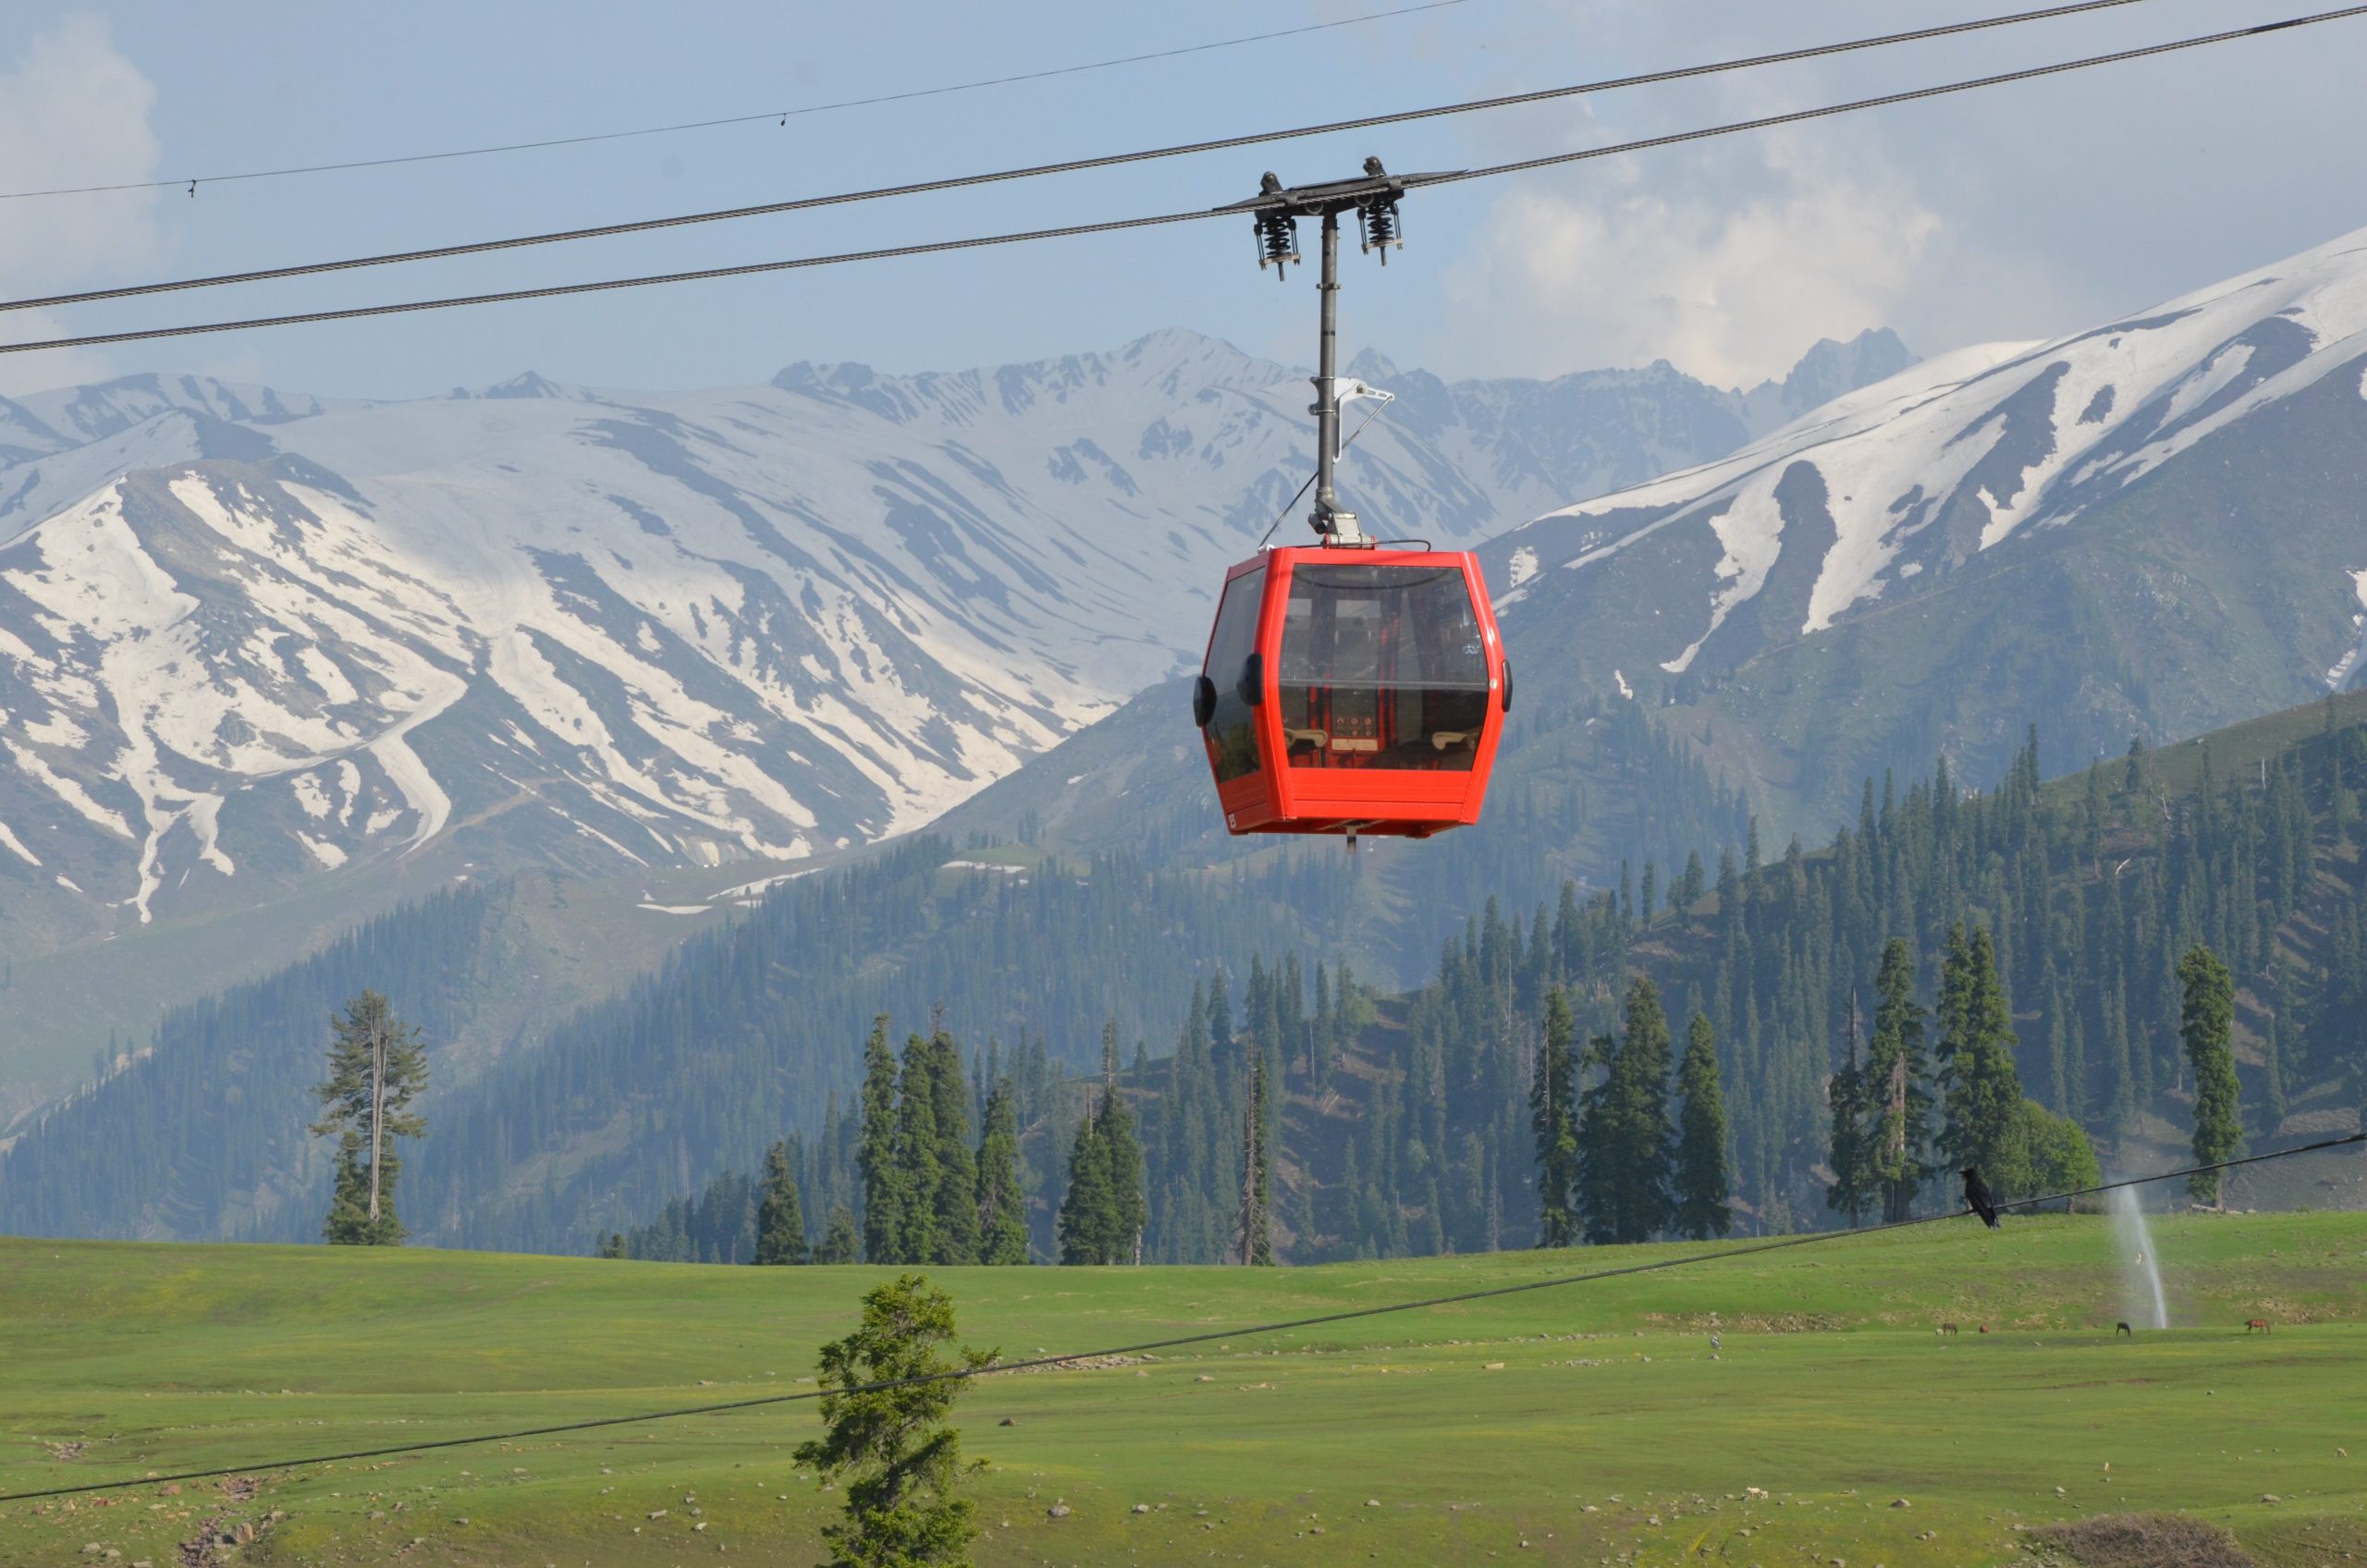 mountain ropeways in India that offer panoramic views